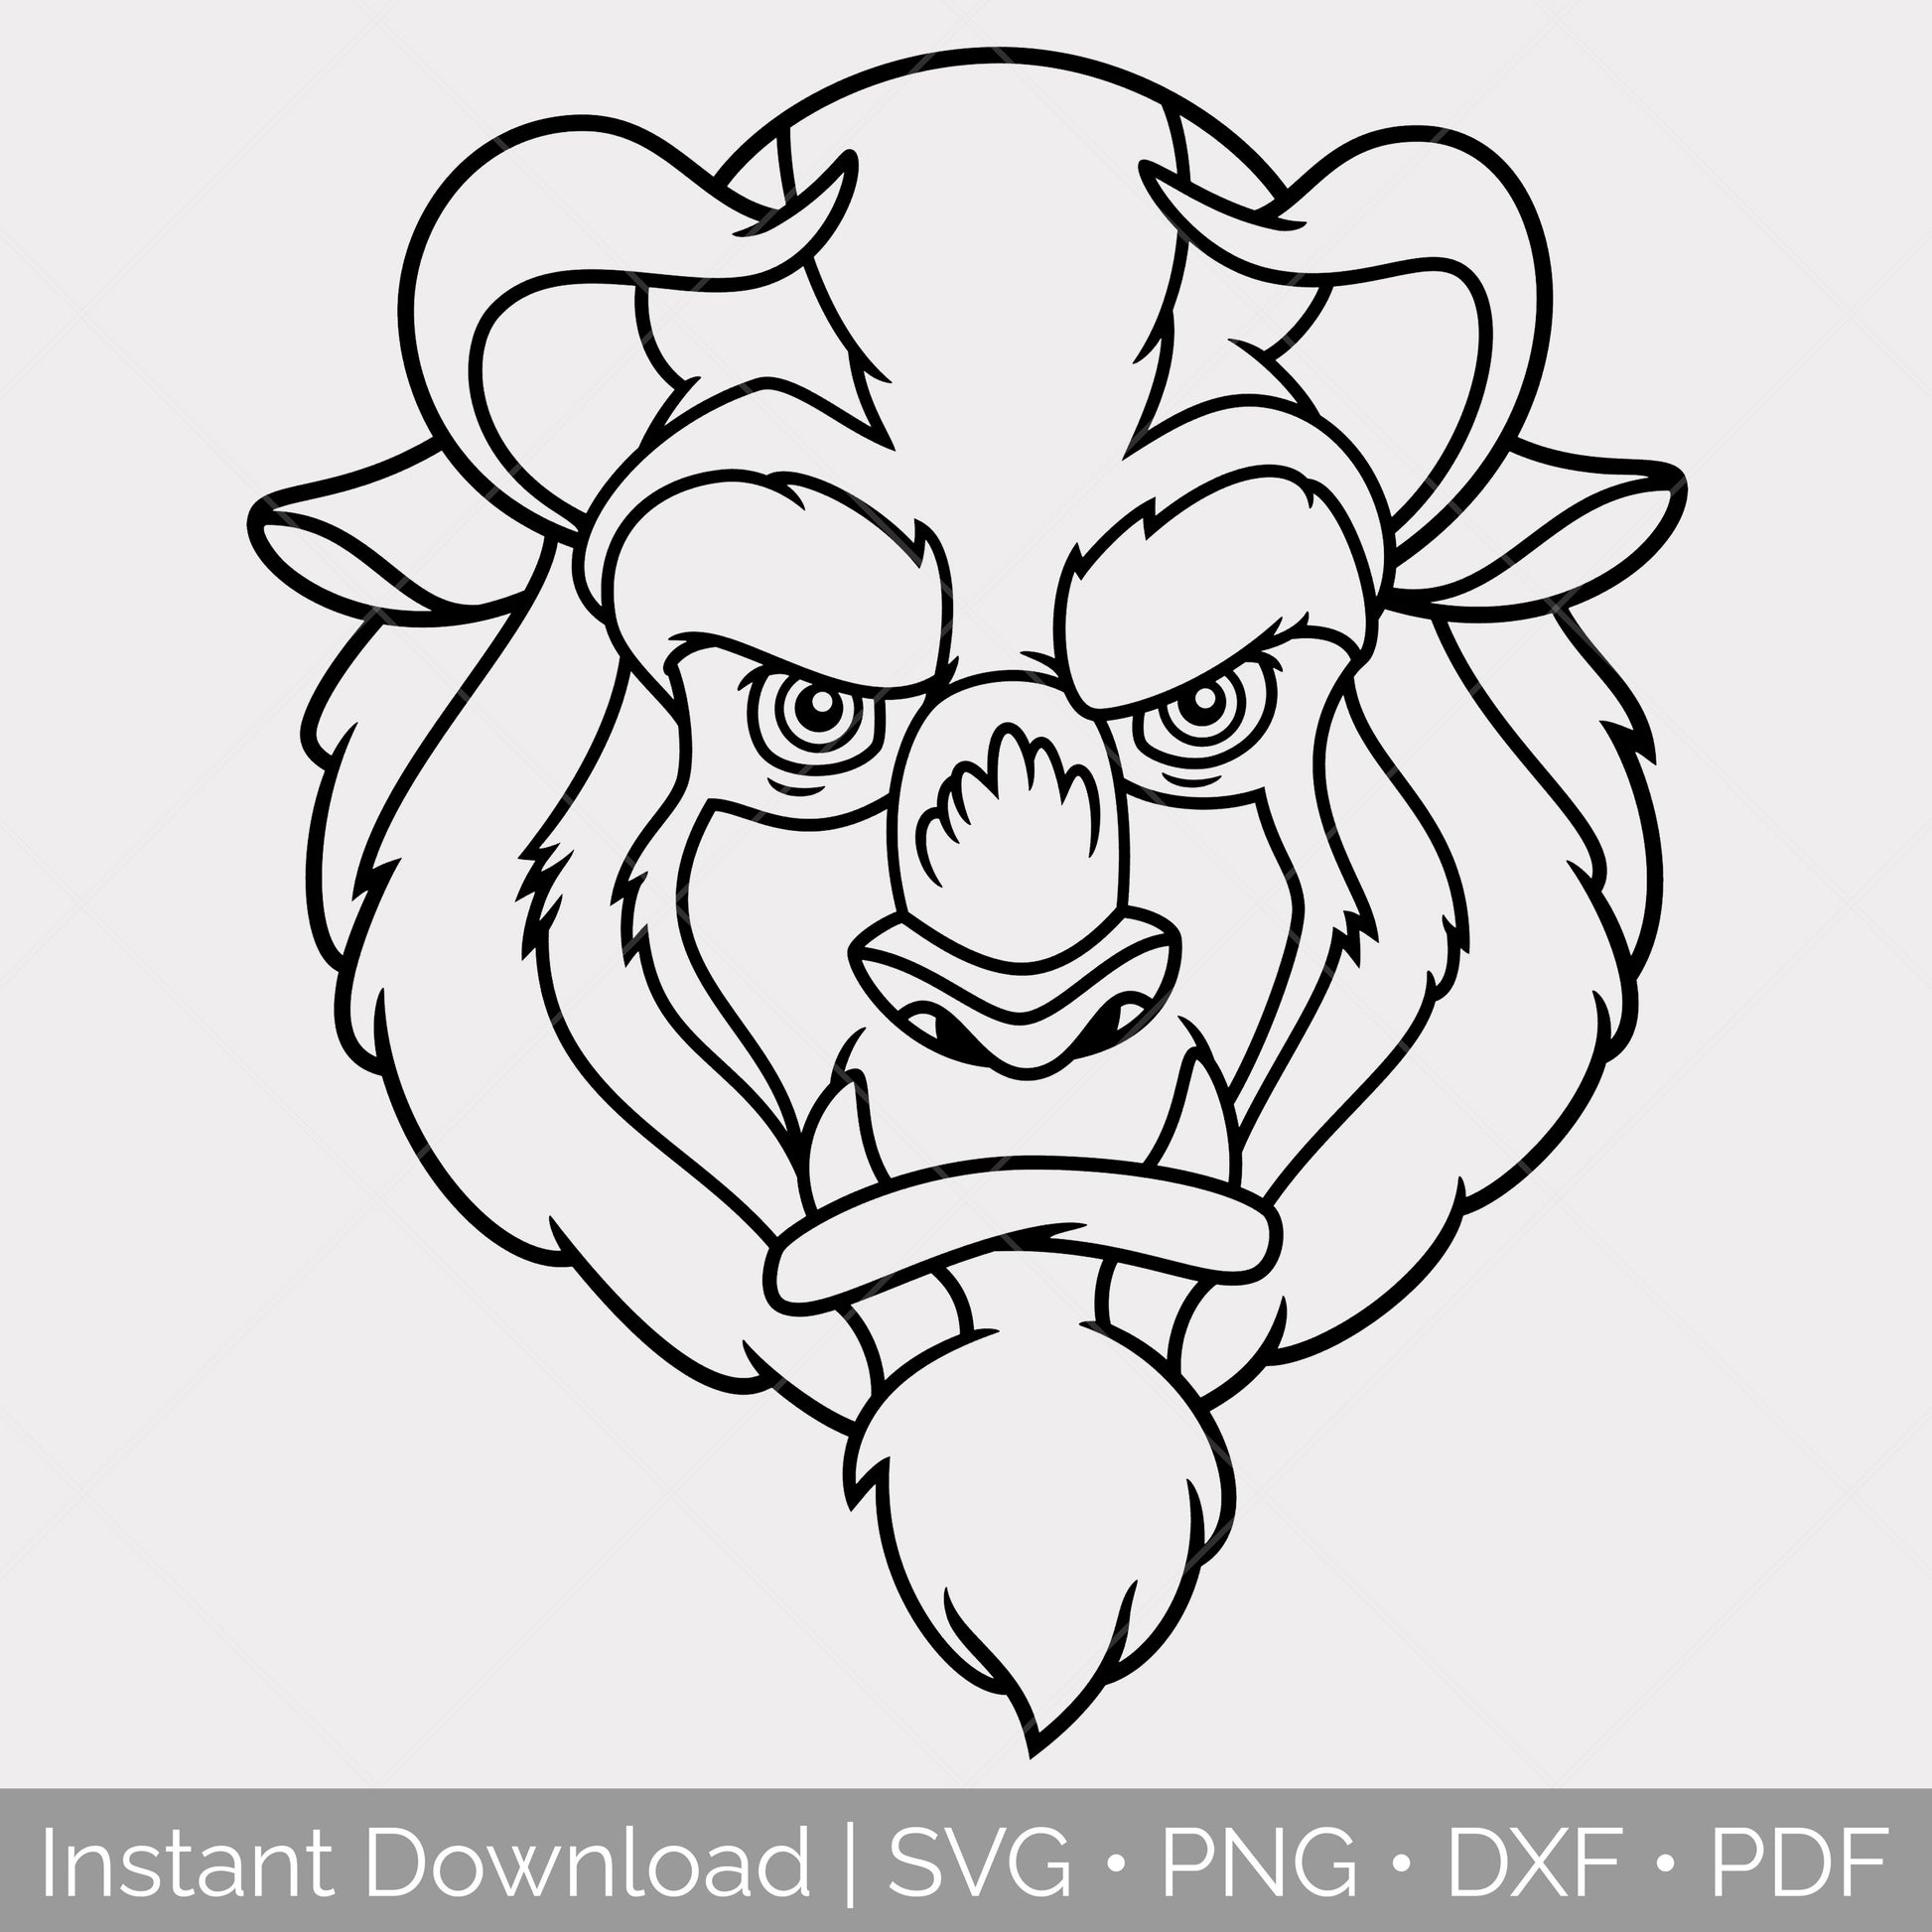 Disney's Beauty and the Beast vector cutting files SVG PNG DXF PDF